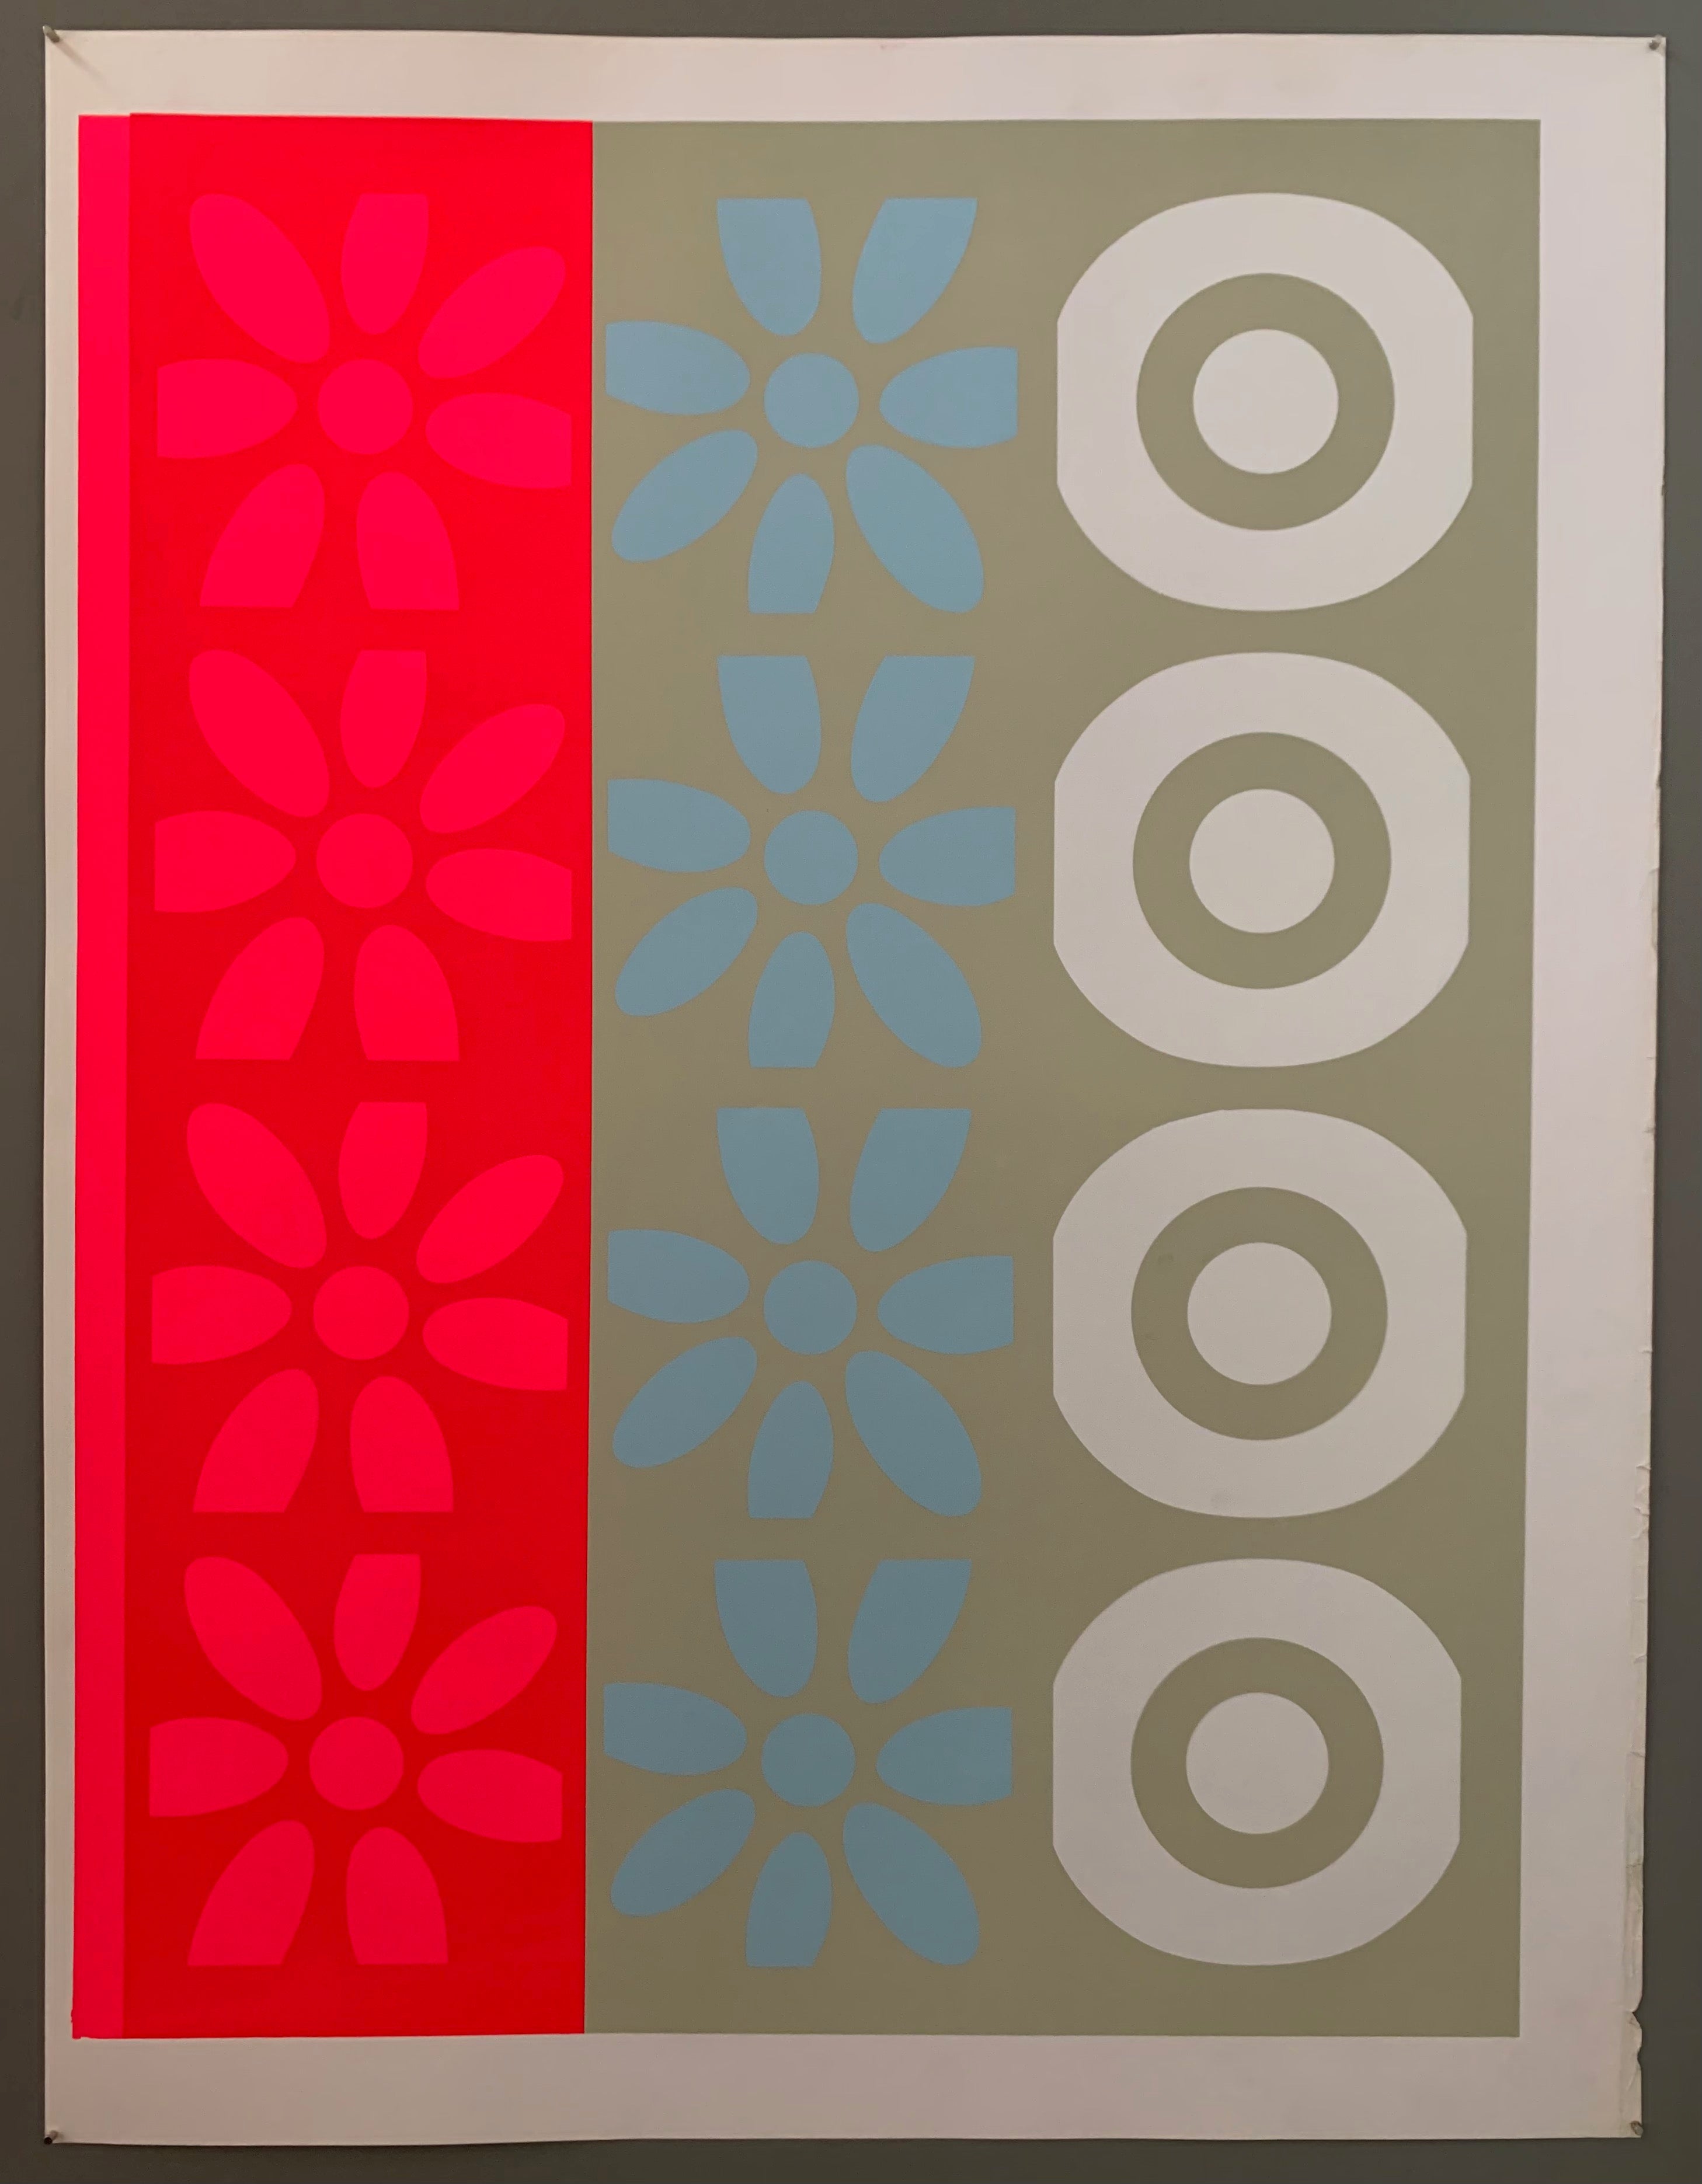 Flowers and targets on gray and pink panels